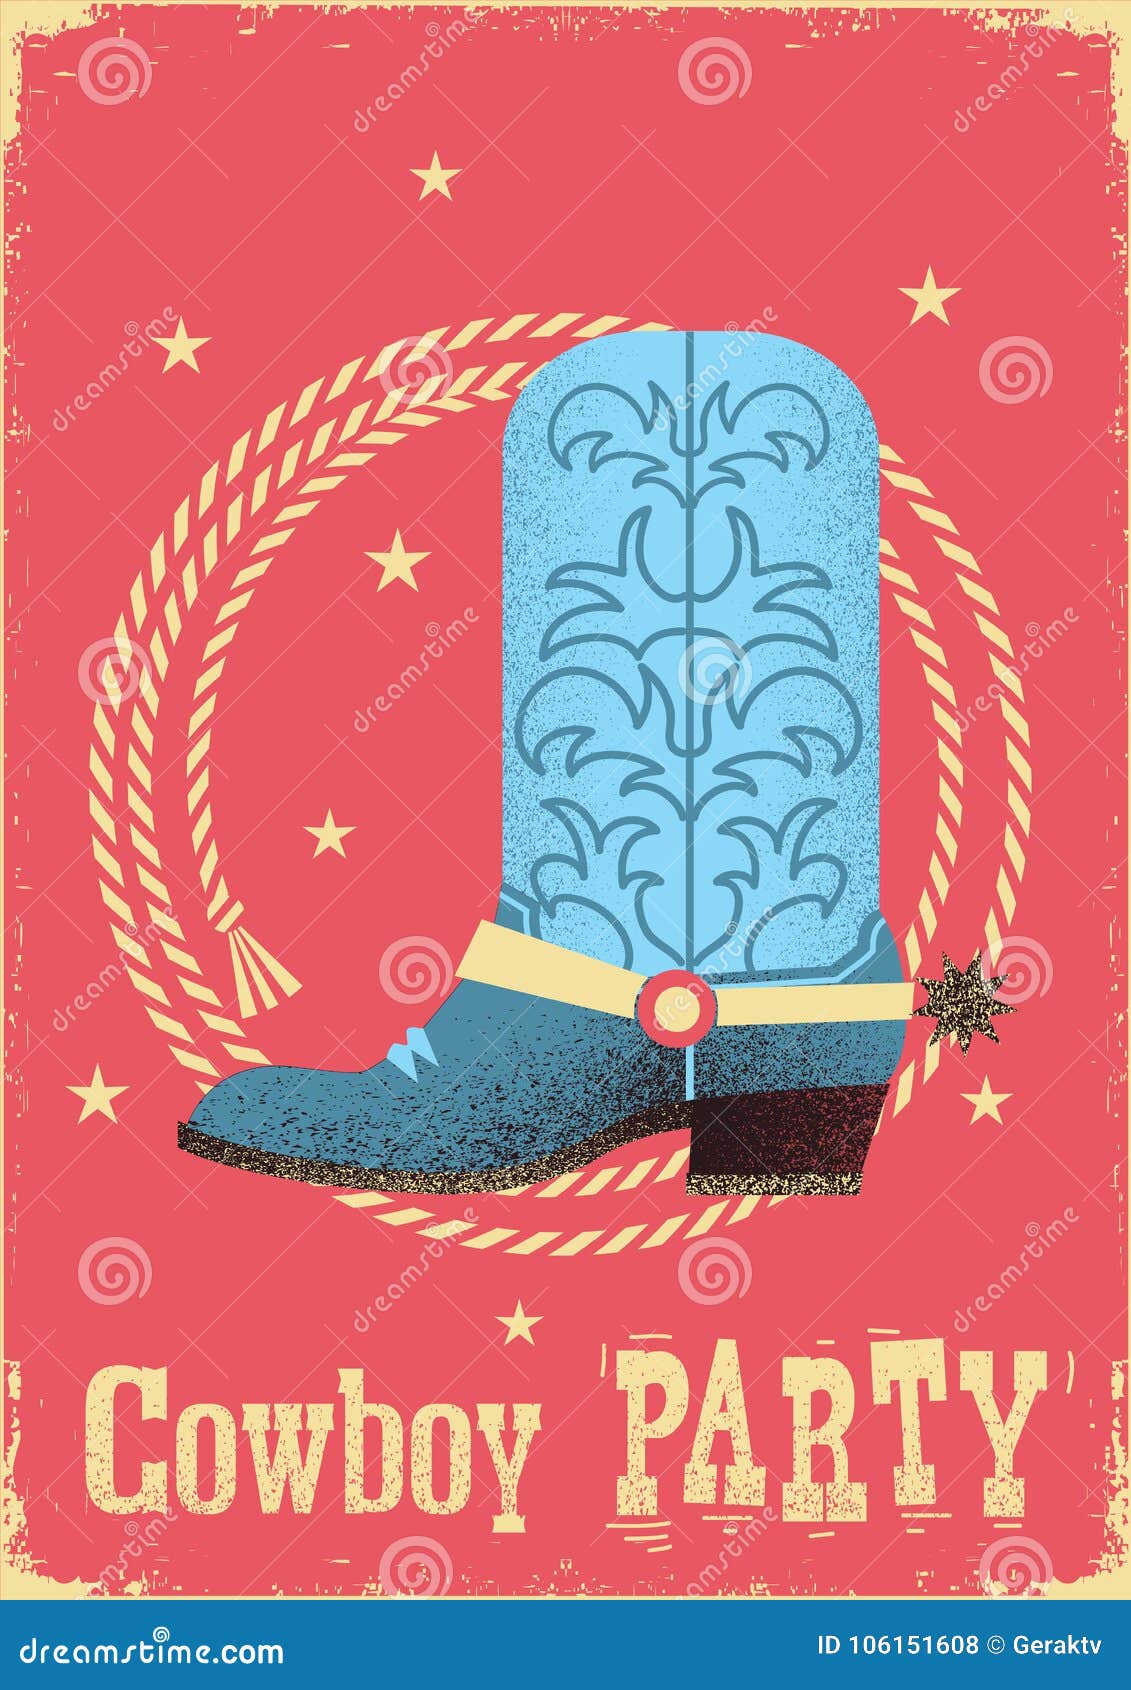 cowboy party card background with western boot and lasso.